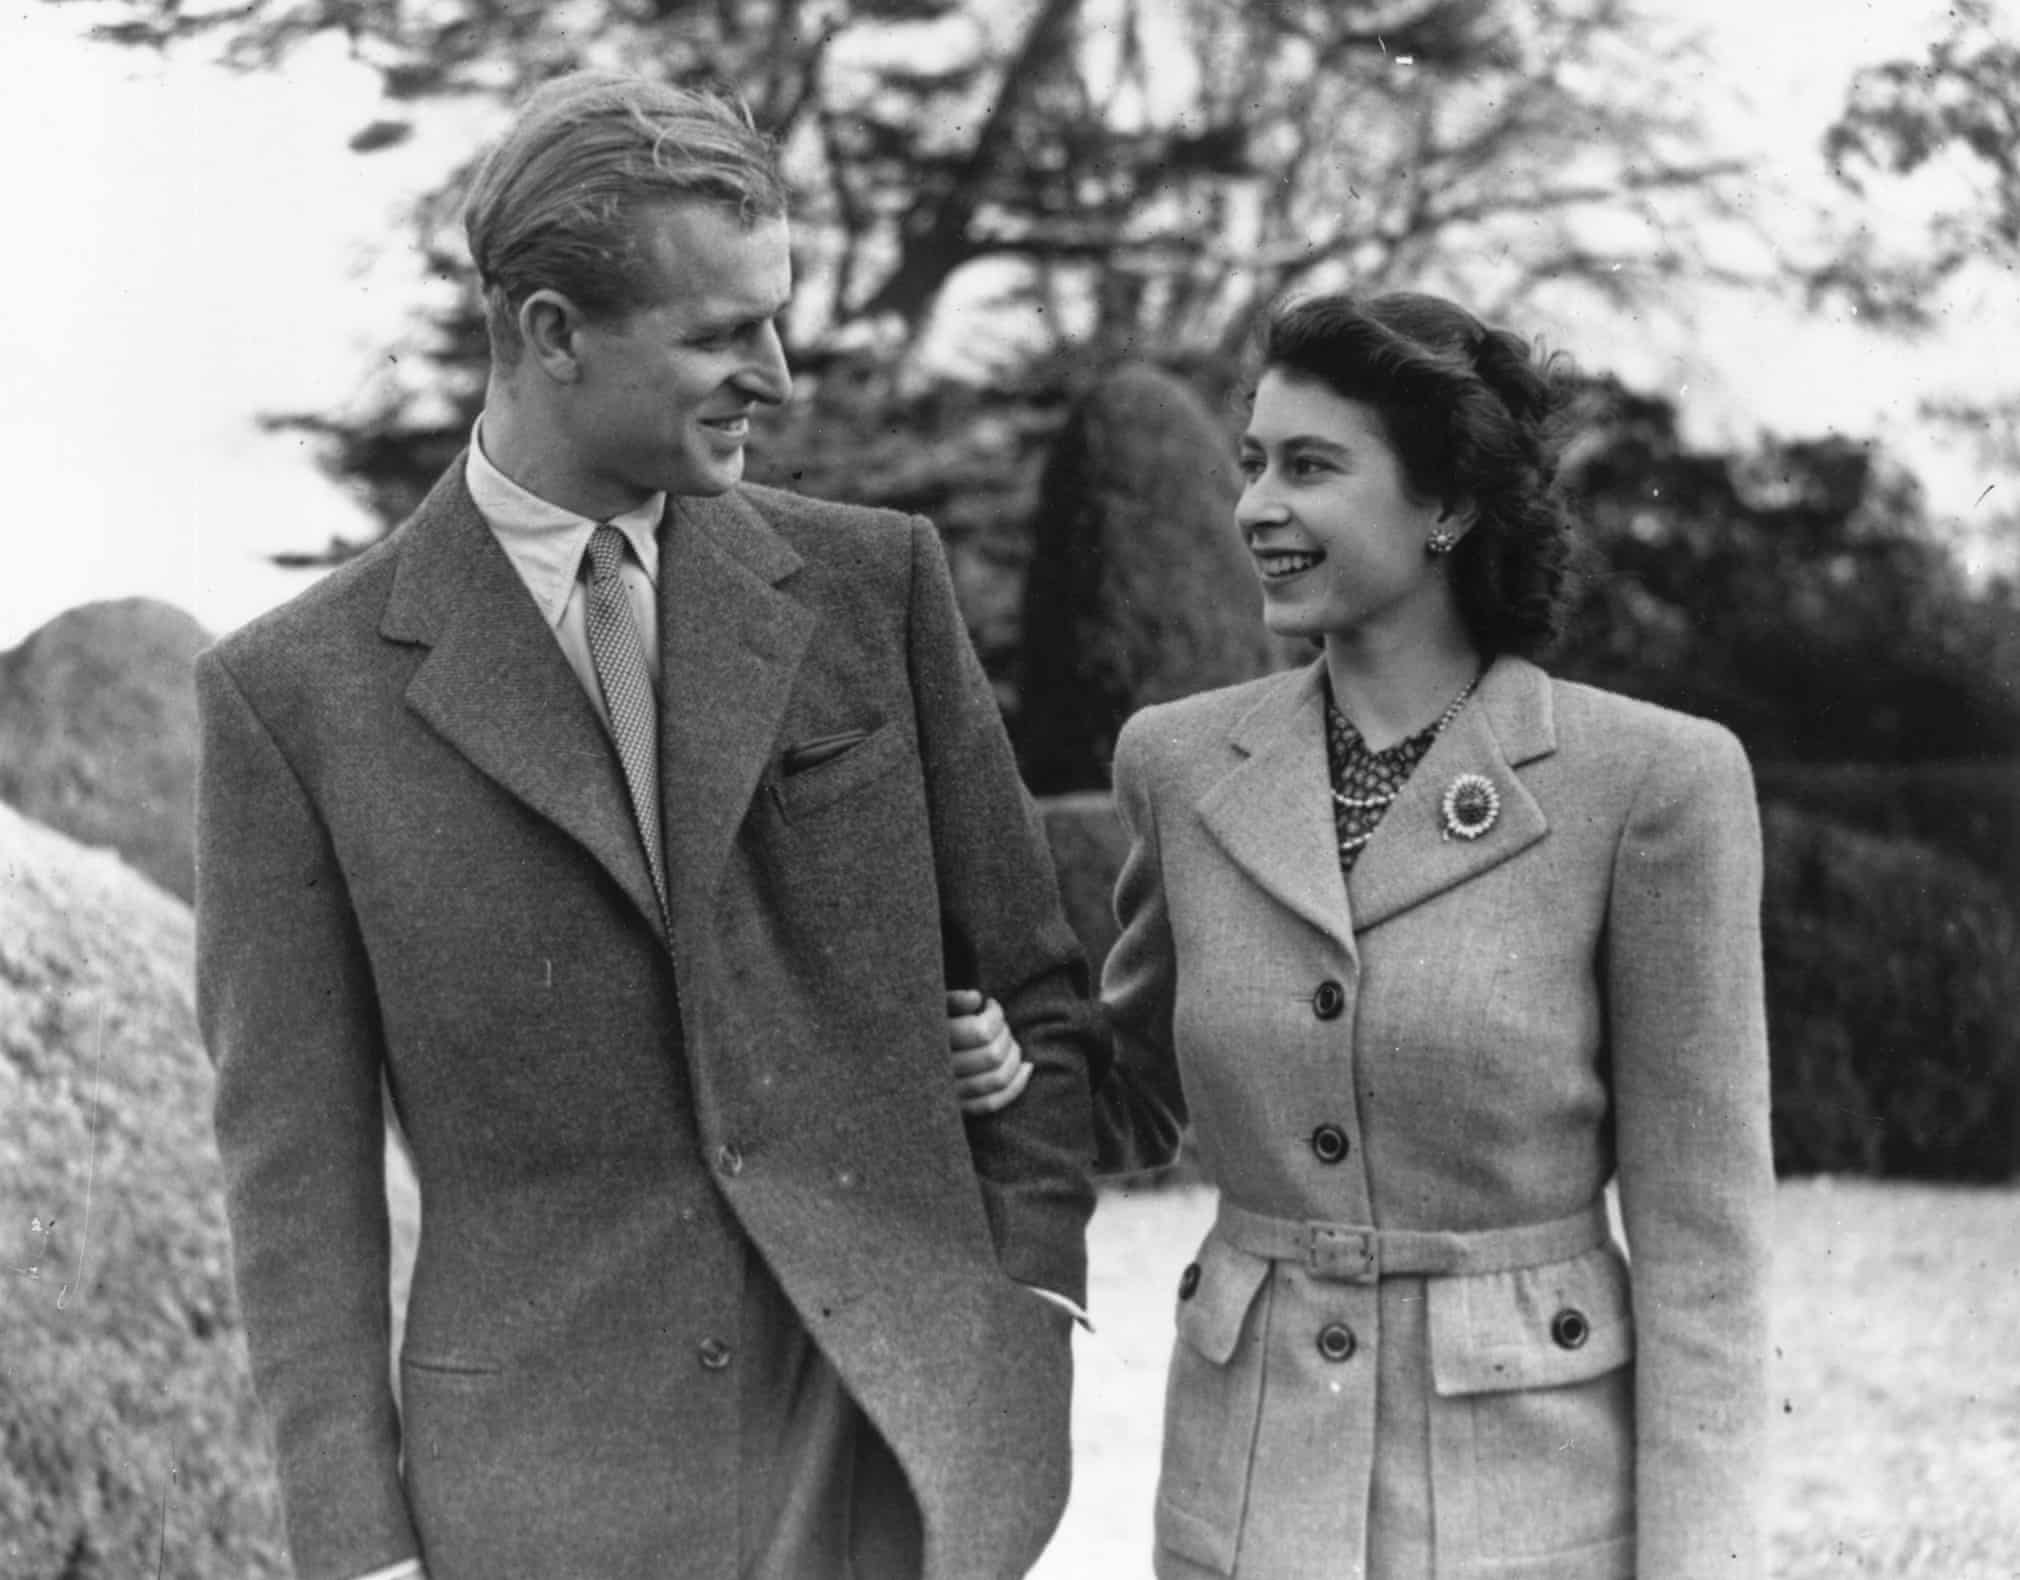 Philip and the Queen enjoy a walk during their honeymoon at Broadlands, Romsey, in Hampshire. Photograph: Topical Press Agency/Getty Images